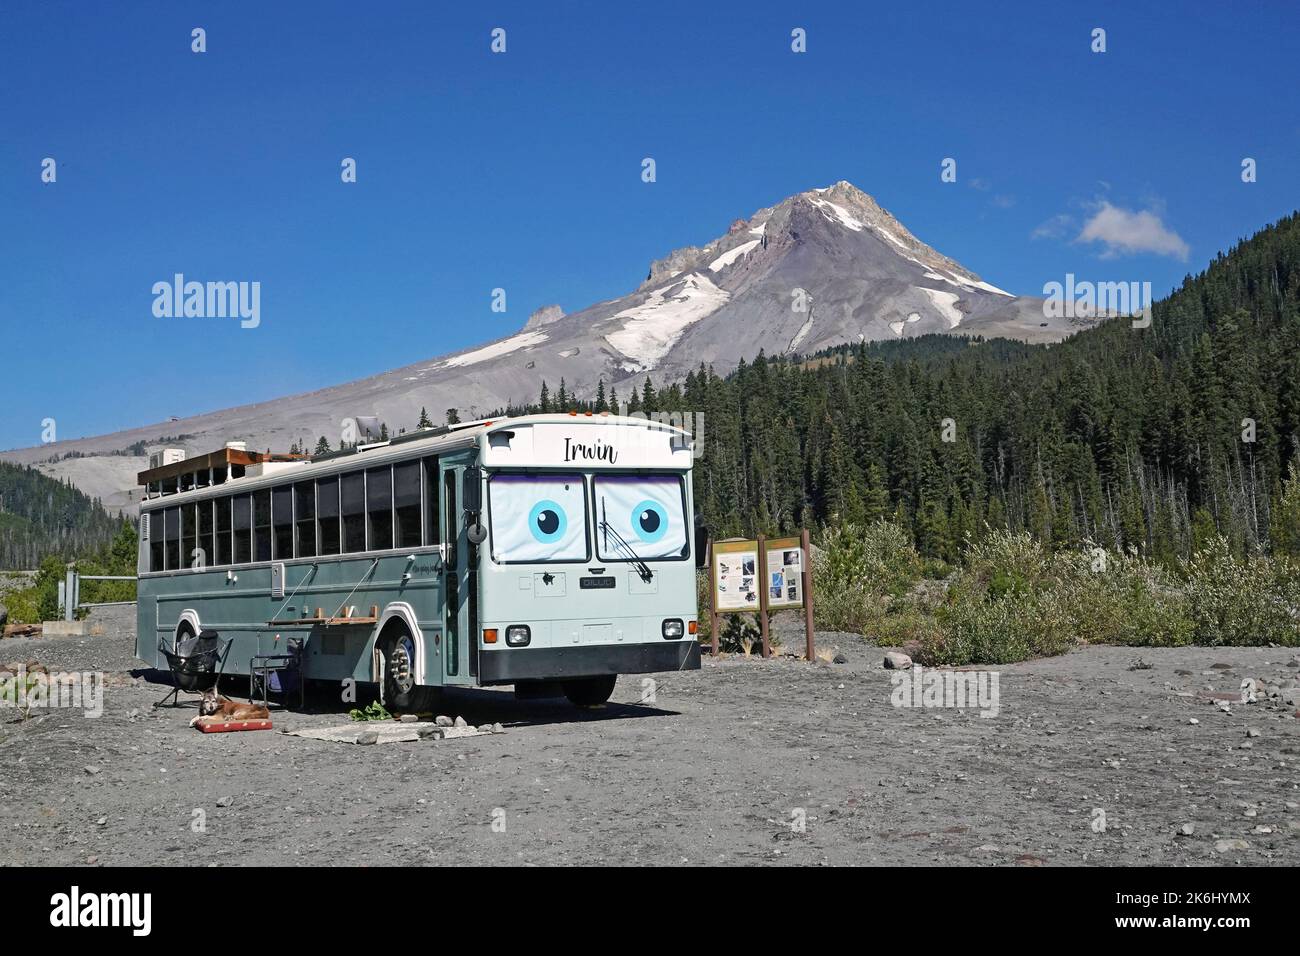 A large bus, turned into a camper, parked at White River Sno Park below Mount Hood, in the Oregon Cascades. Stock Photo